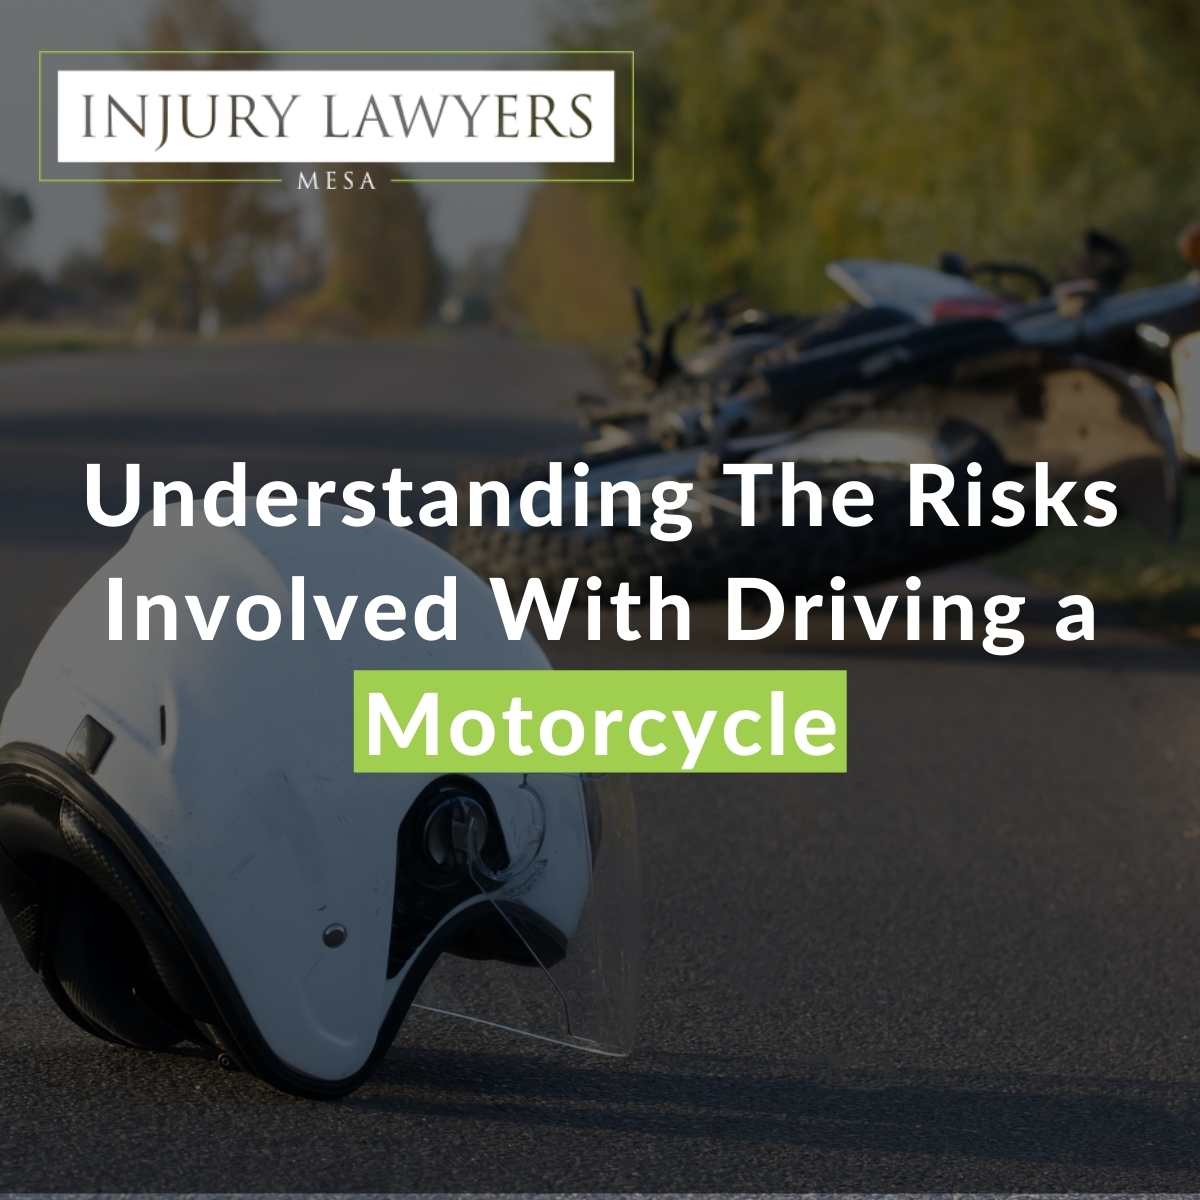 Understanding The Risks Involved With Driving a Motorcycle